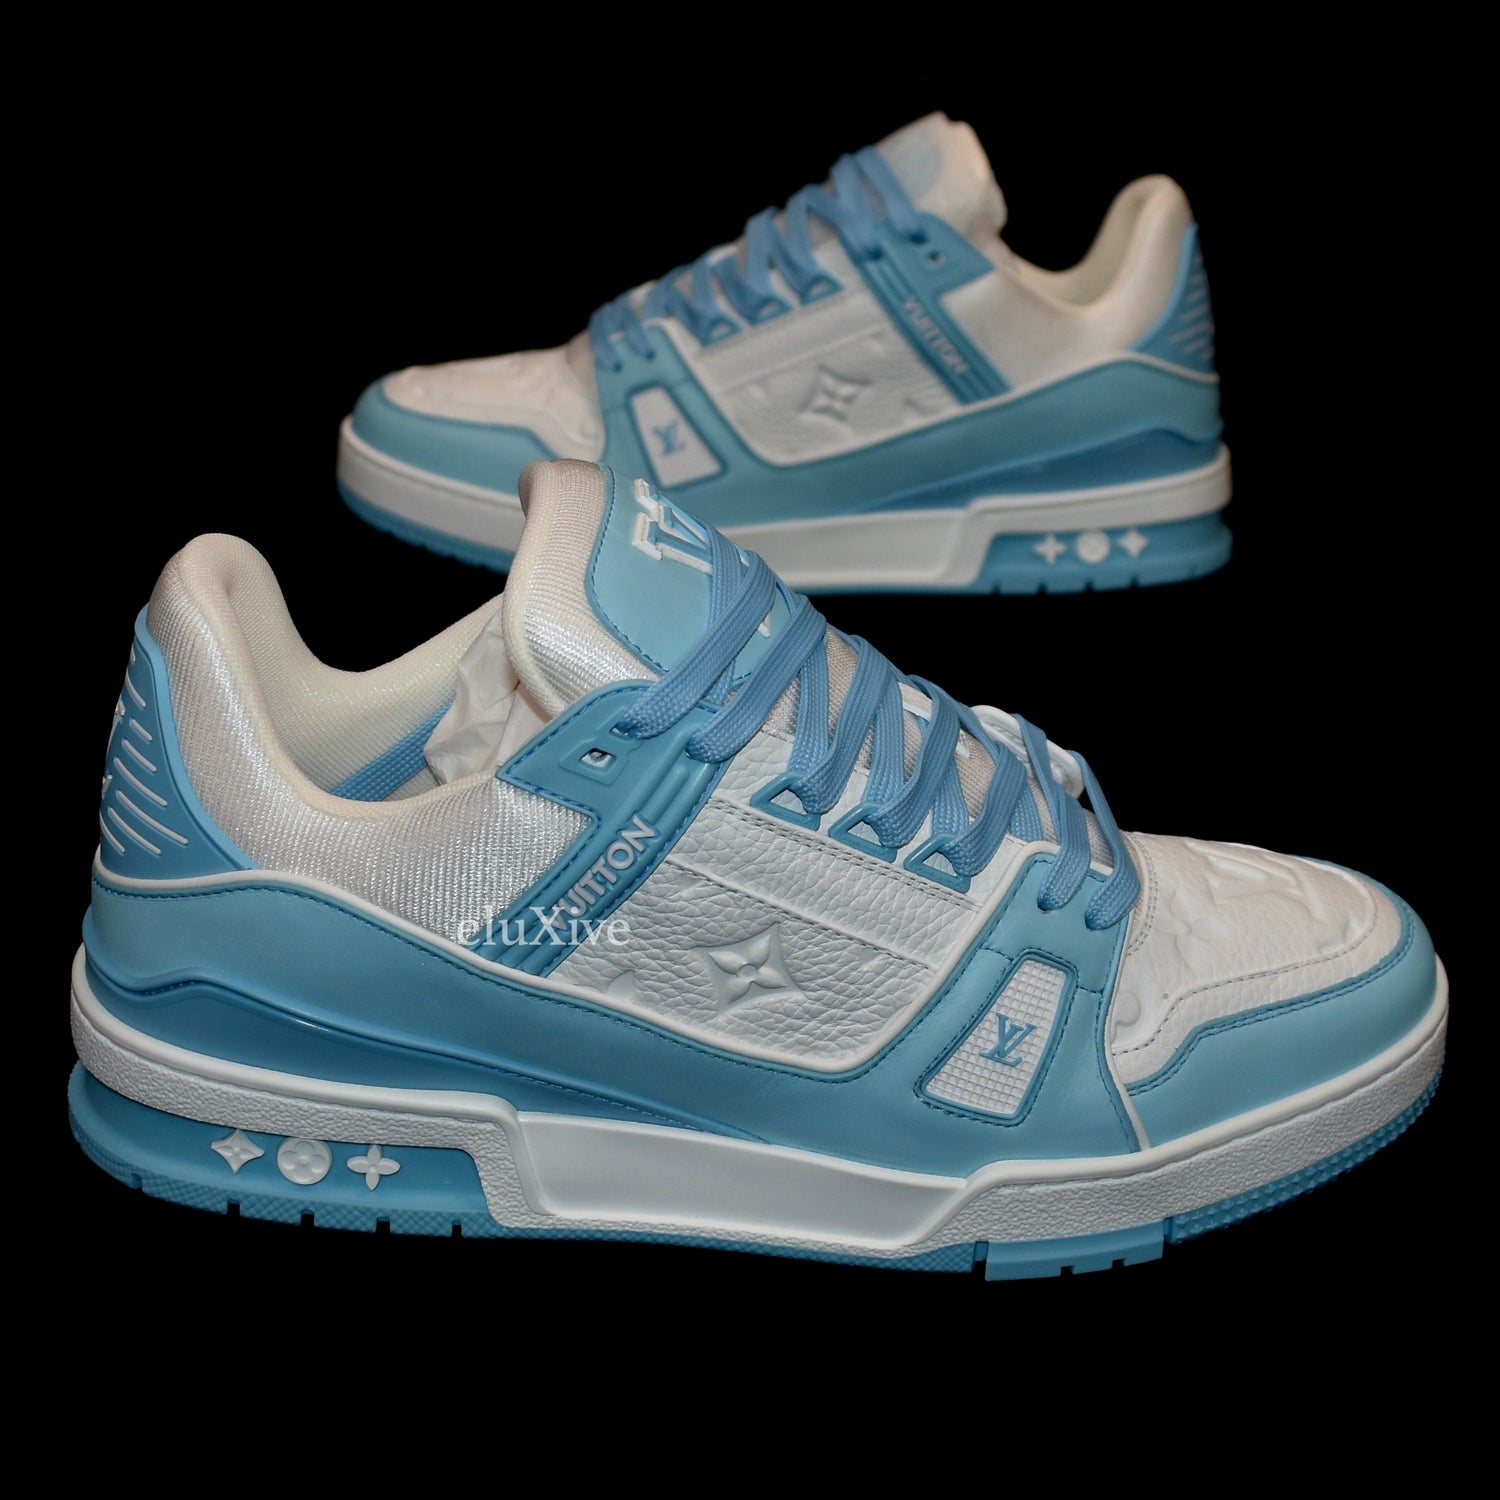 Louis Vuitton - White/Sky Blue 'UNC' Leather Trainer Sneakers – eluXive